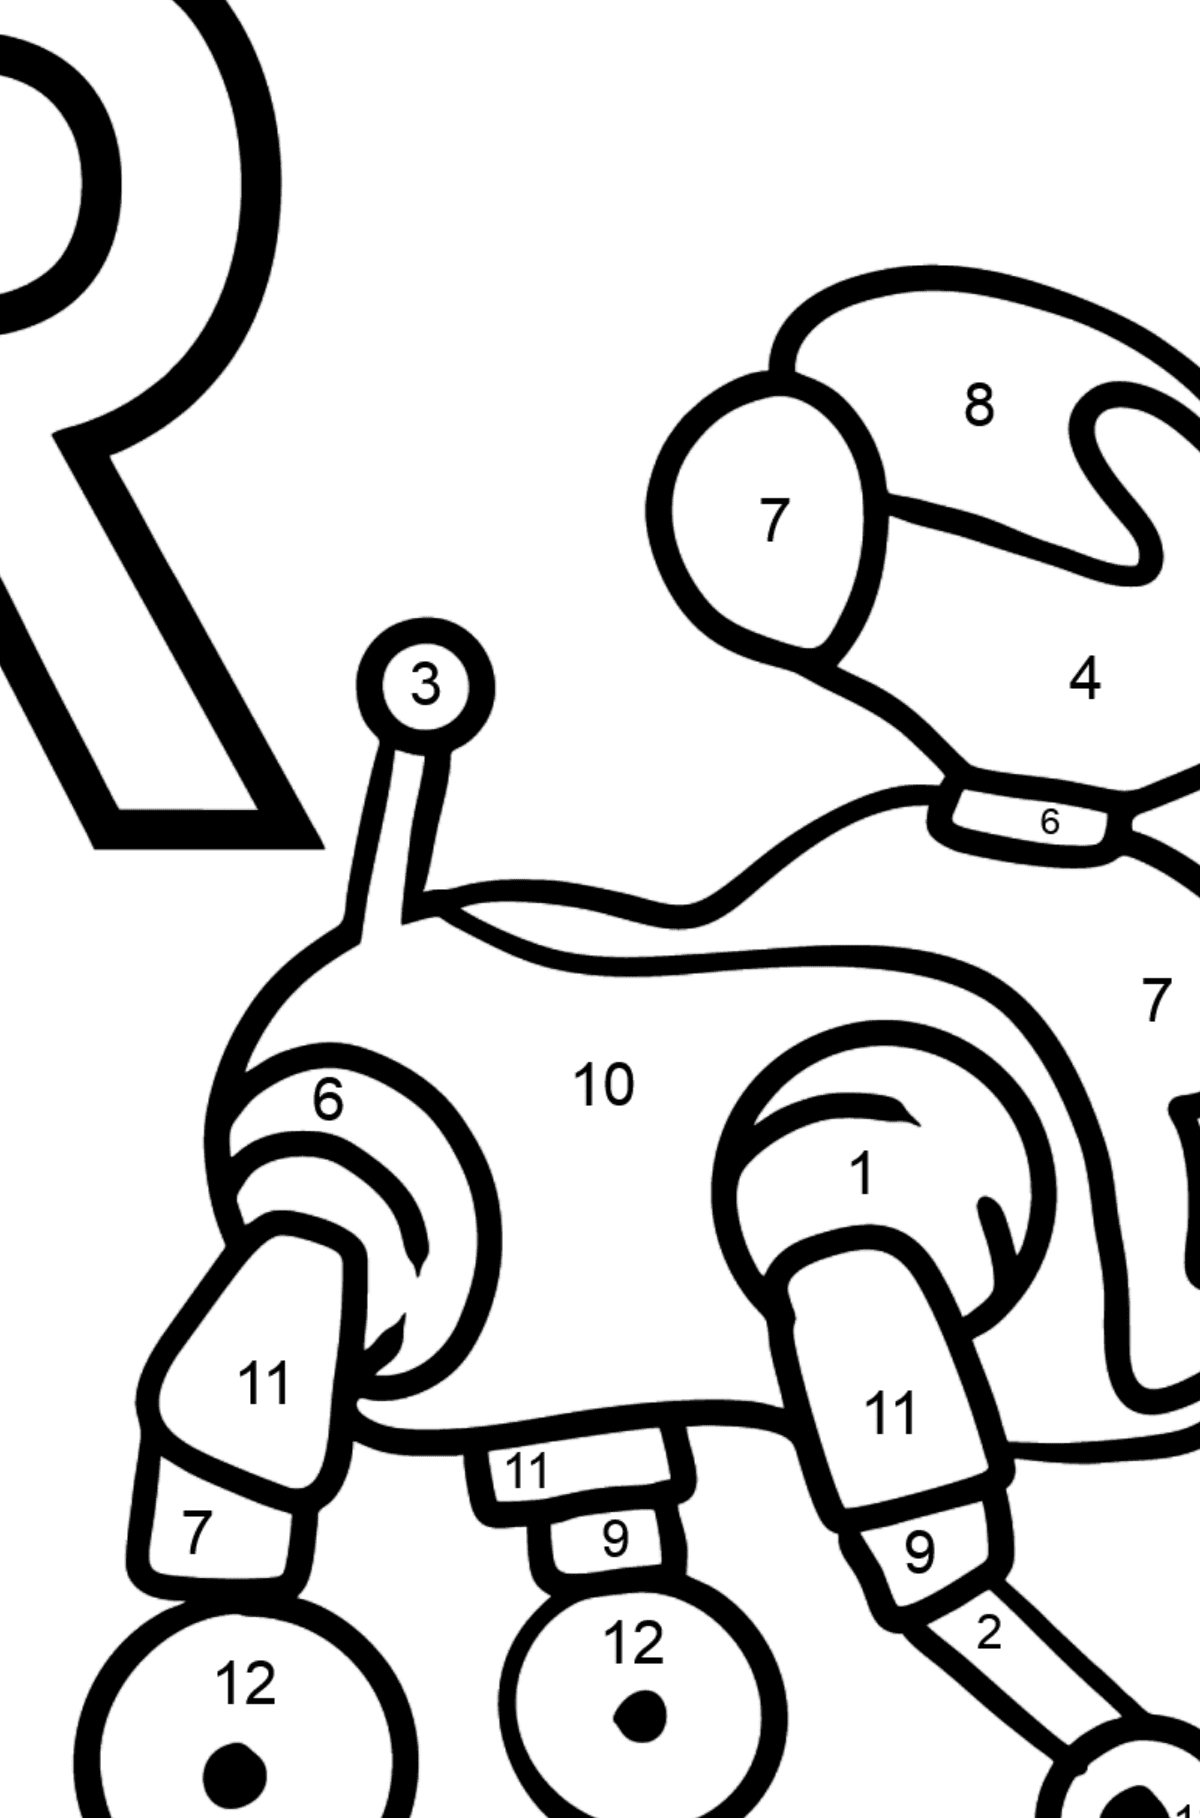 Portuguese Letter R coloring pages - ROBÔ - Coloring by Numbers for Kids